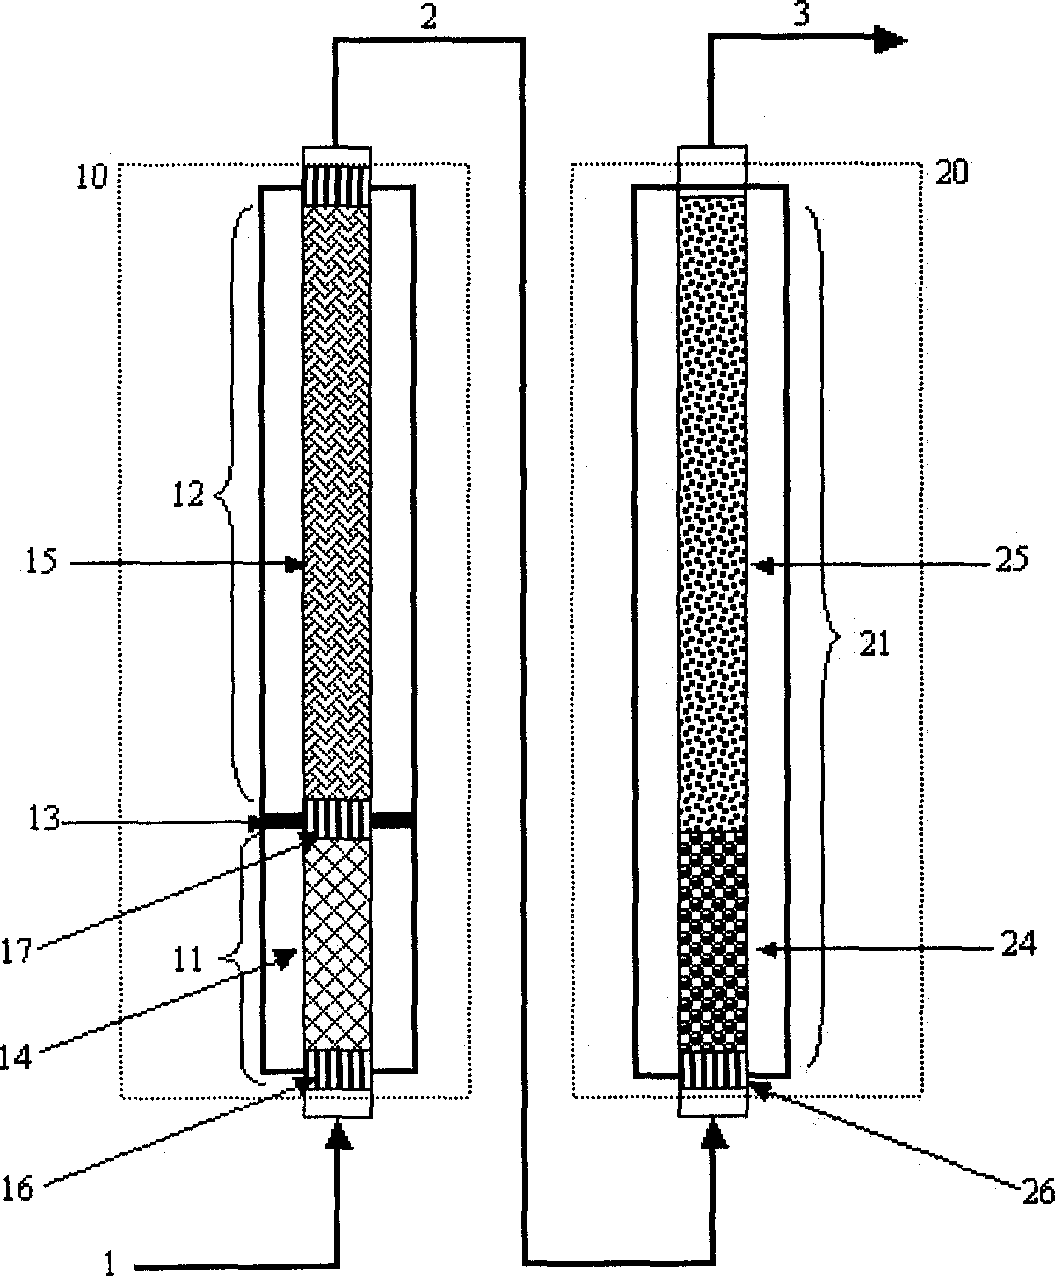 Method of producing unsaturated aldehyde and unsaturated acid in fixed-bed catalytic partial oxidation reactor with enhanced heat control system